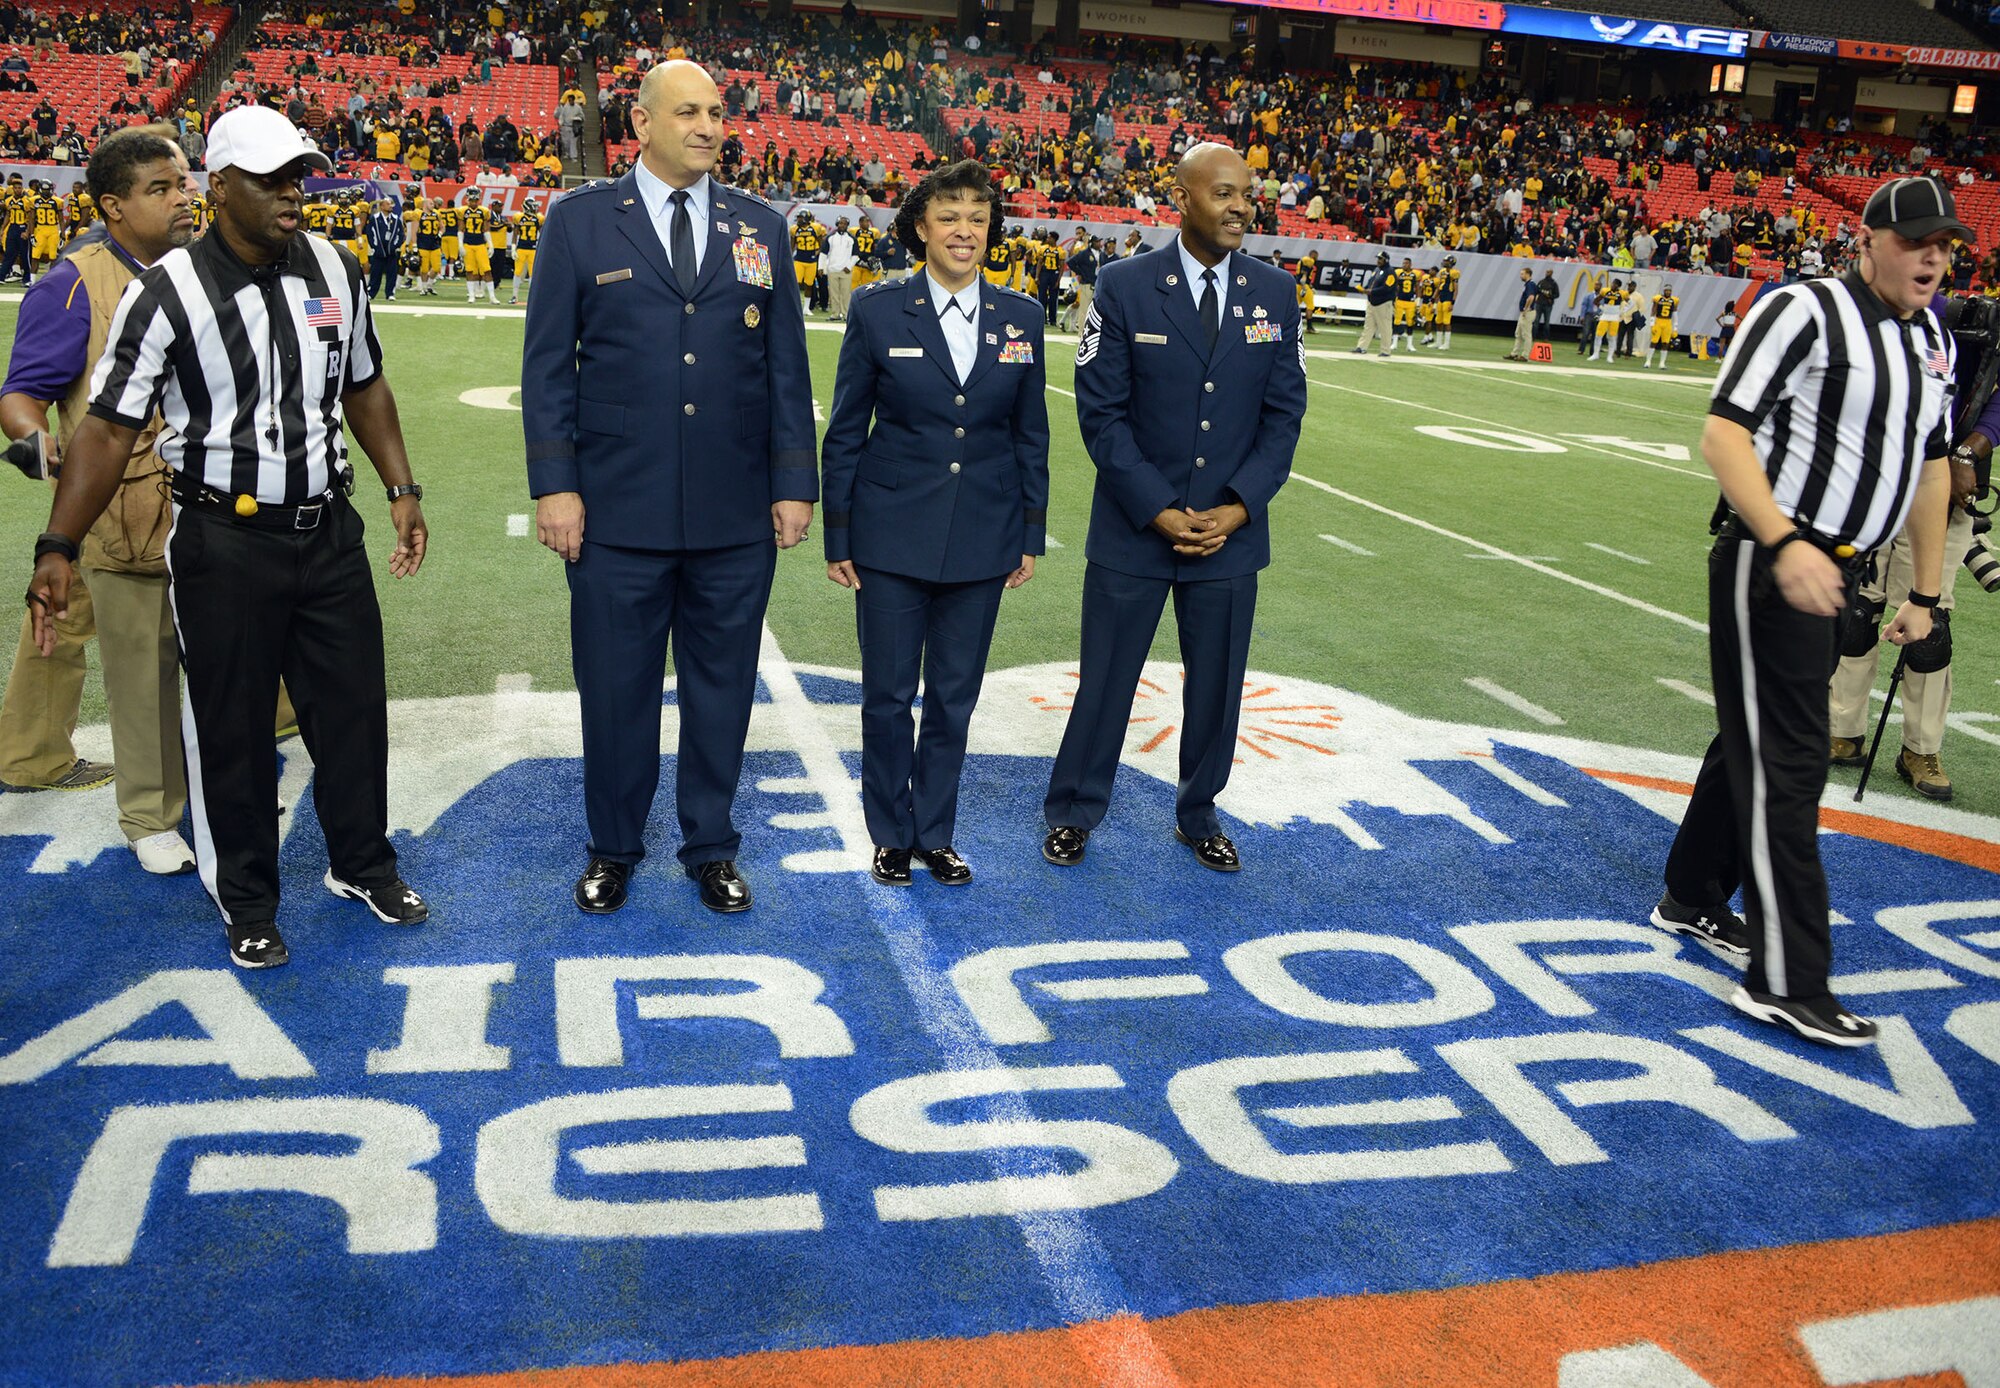 Air Force Reserve Command leadership take the field for the coin toss at the Air Force Reserve Celebration Bowl Dec 19 in Atlanta. The game featured the champions from the SWAC and MEAC in a winner take all the championship of Historicall Black Colleges and Universities. North Carolina A&T defeated Alcorn State 41-34 in a exciting game. (Air Force photo/Master Sgt Chance Babin)